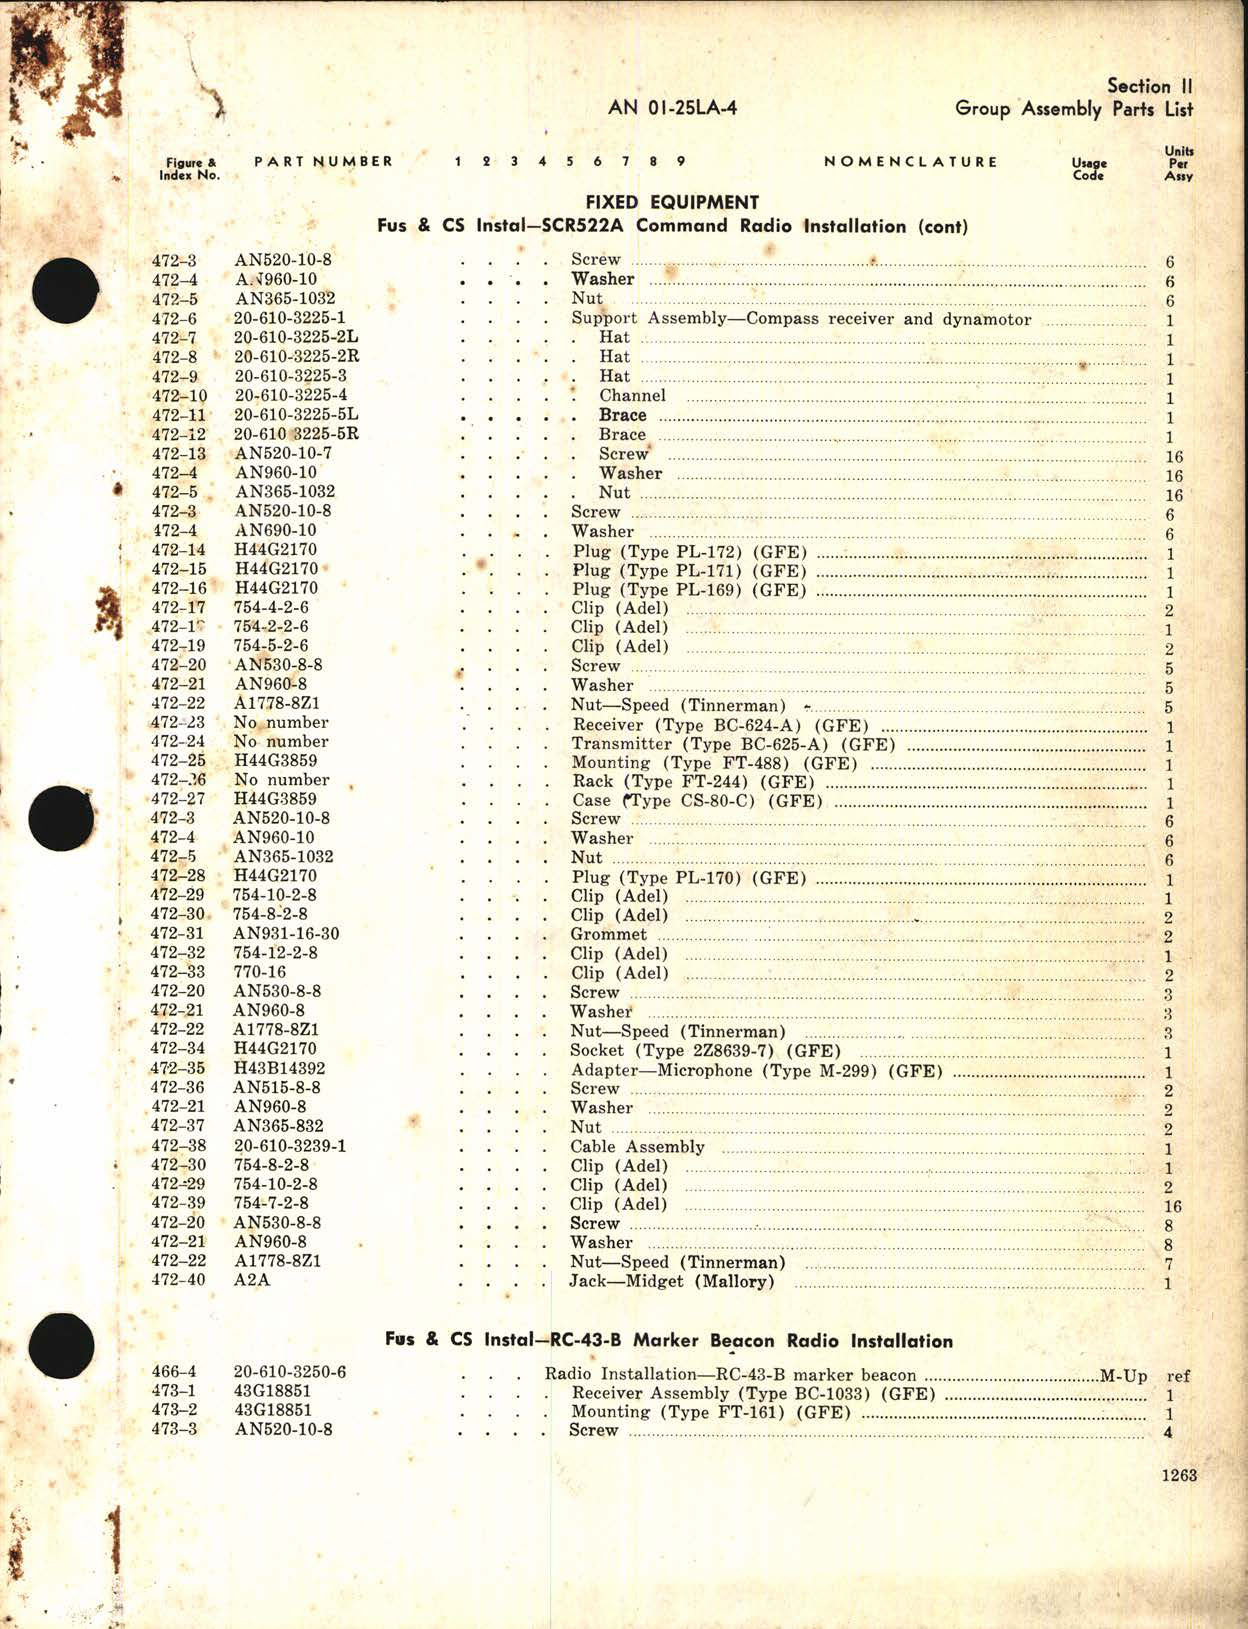 Sample page 1 from AirCorps Library document: Parts Catalog for C-46A, C-46D, and R5C-1